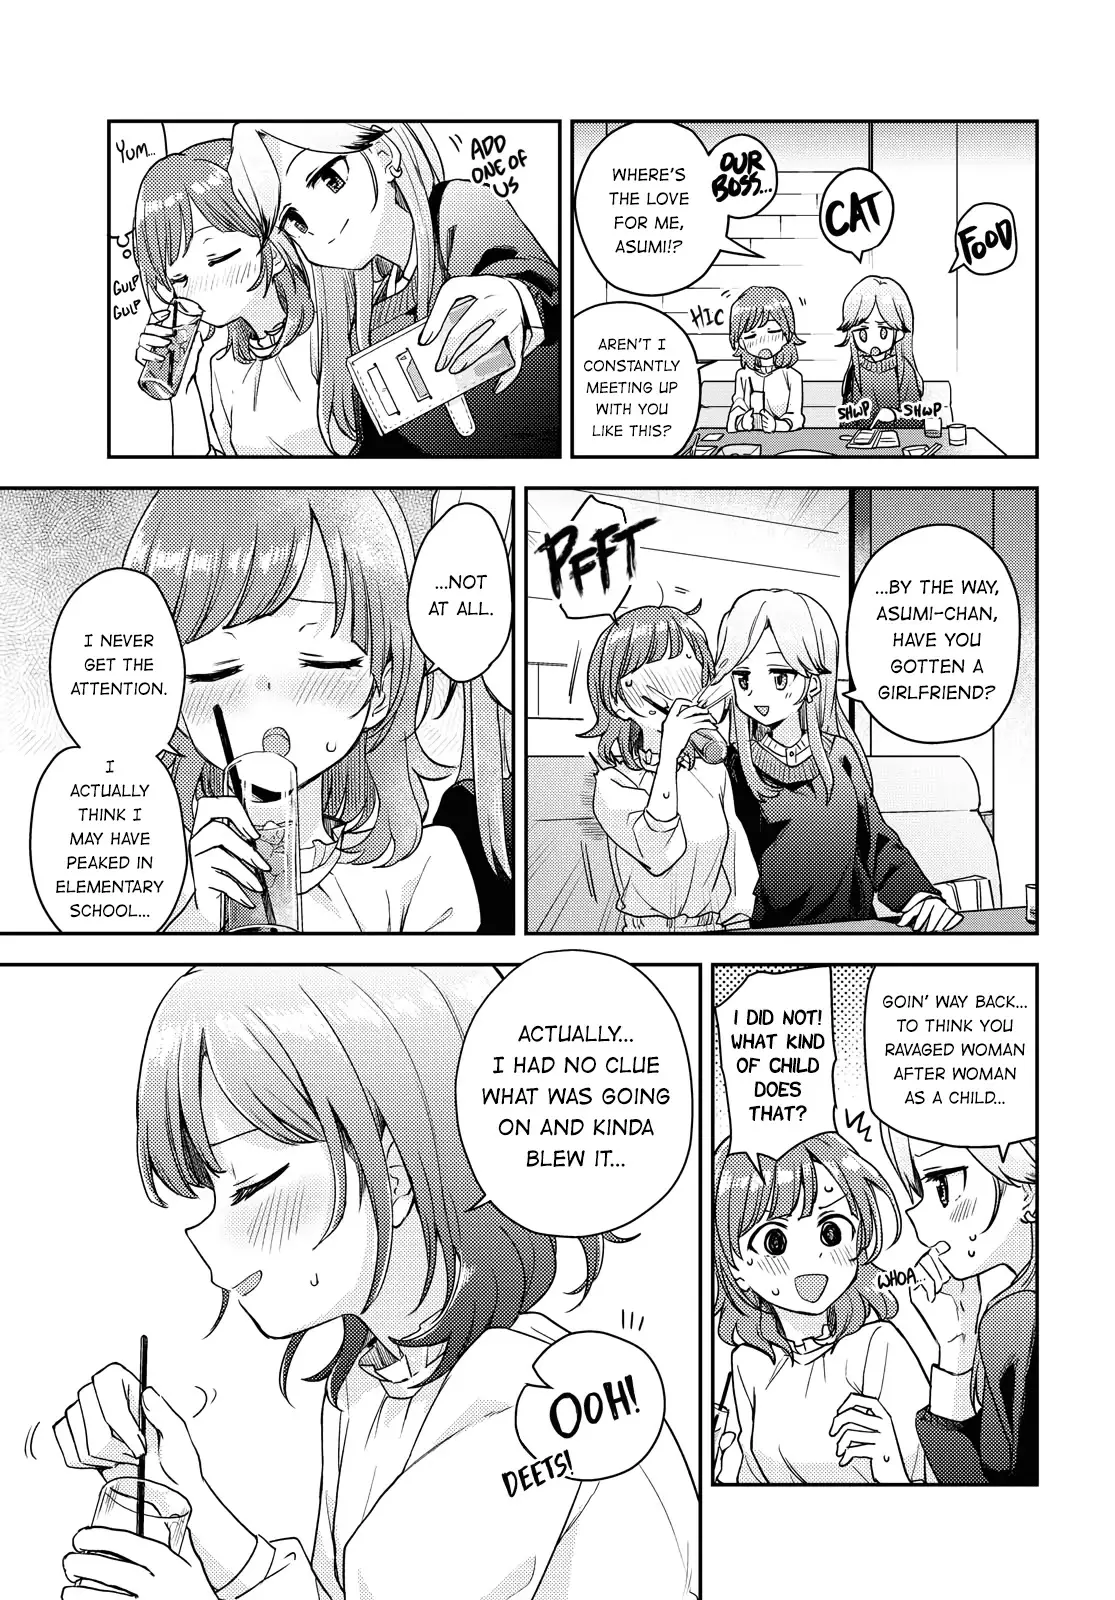 Asumi-Chan Is Interested In Lesbian Brothels! - 1 page 5